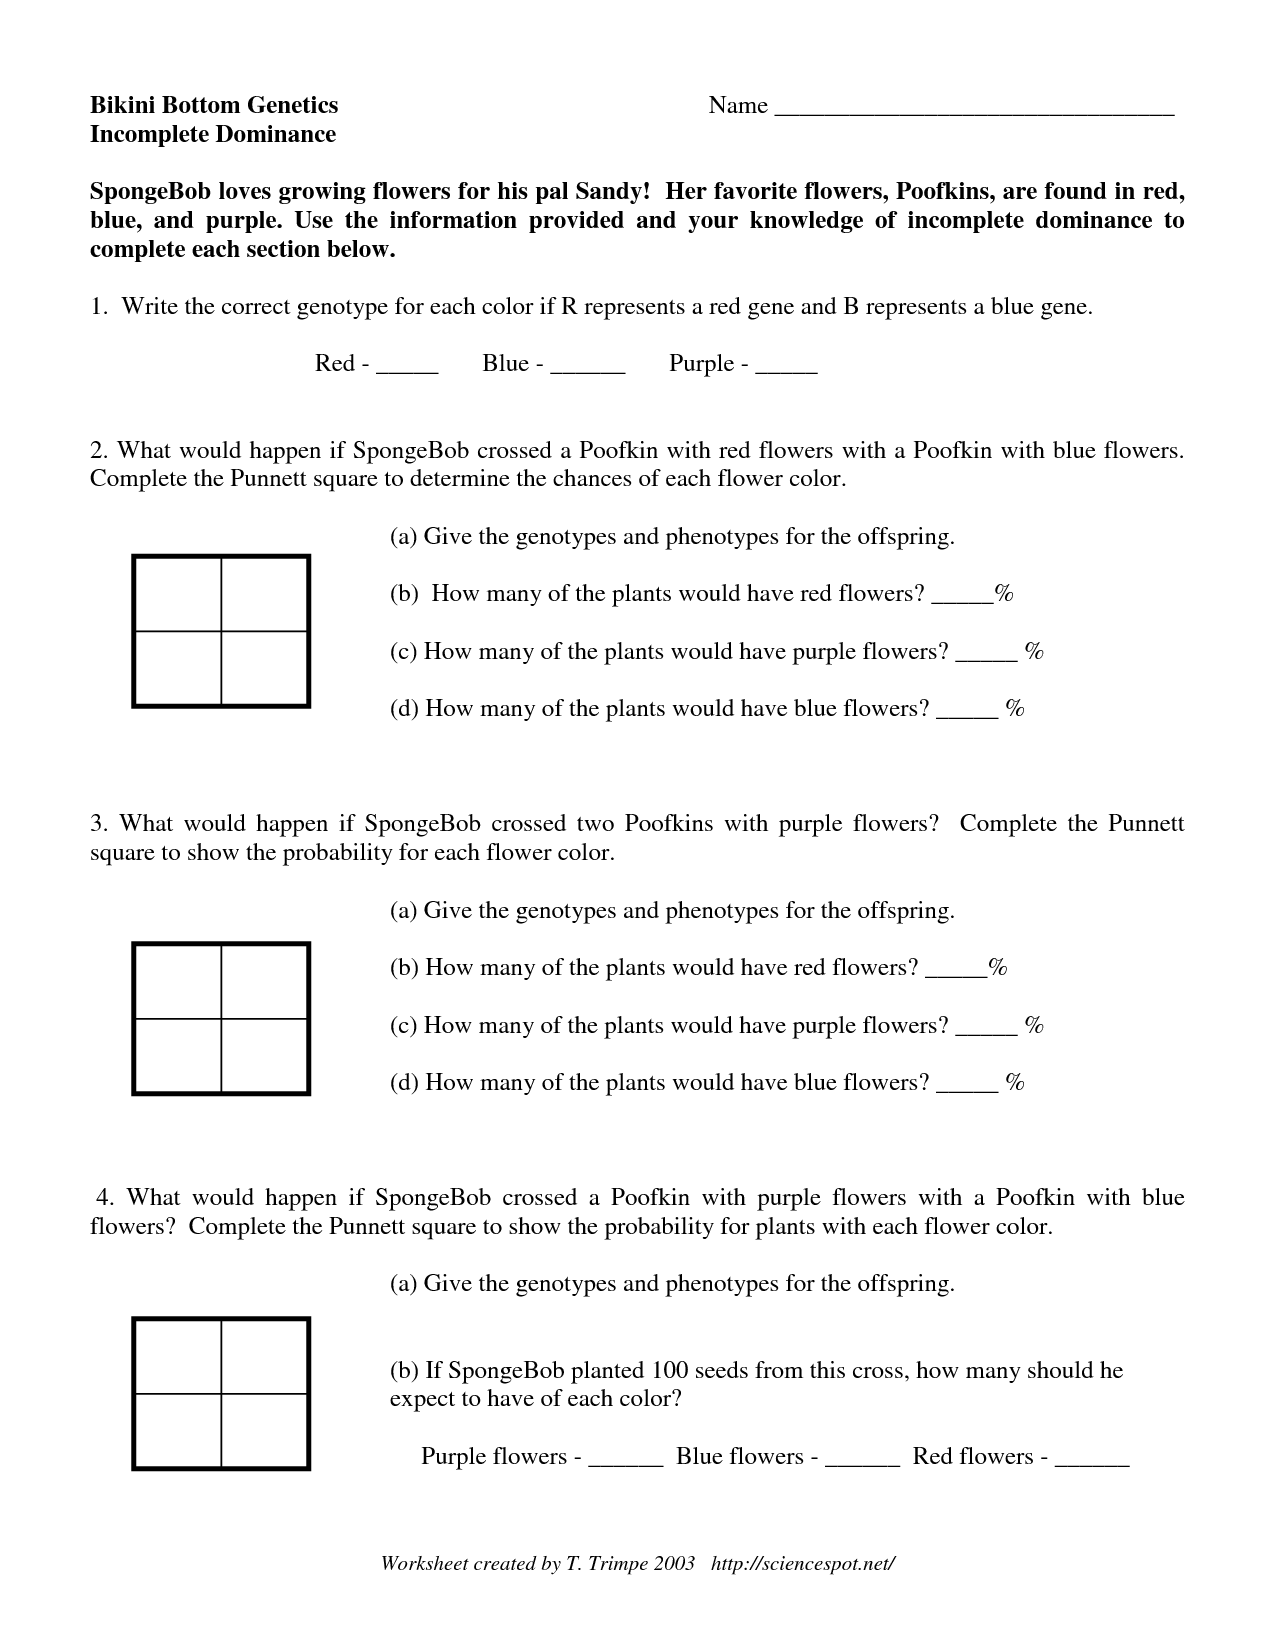 16-best-images-of-incomplete-and-codominance-worksheet-answers